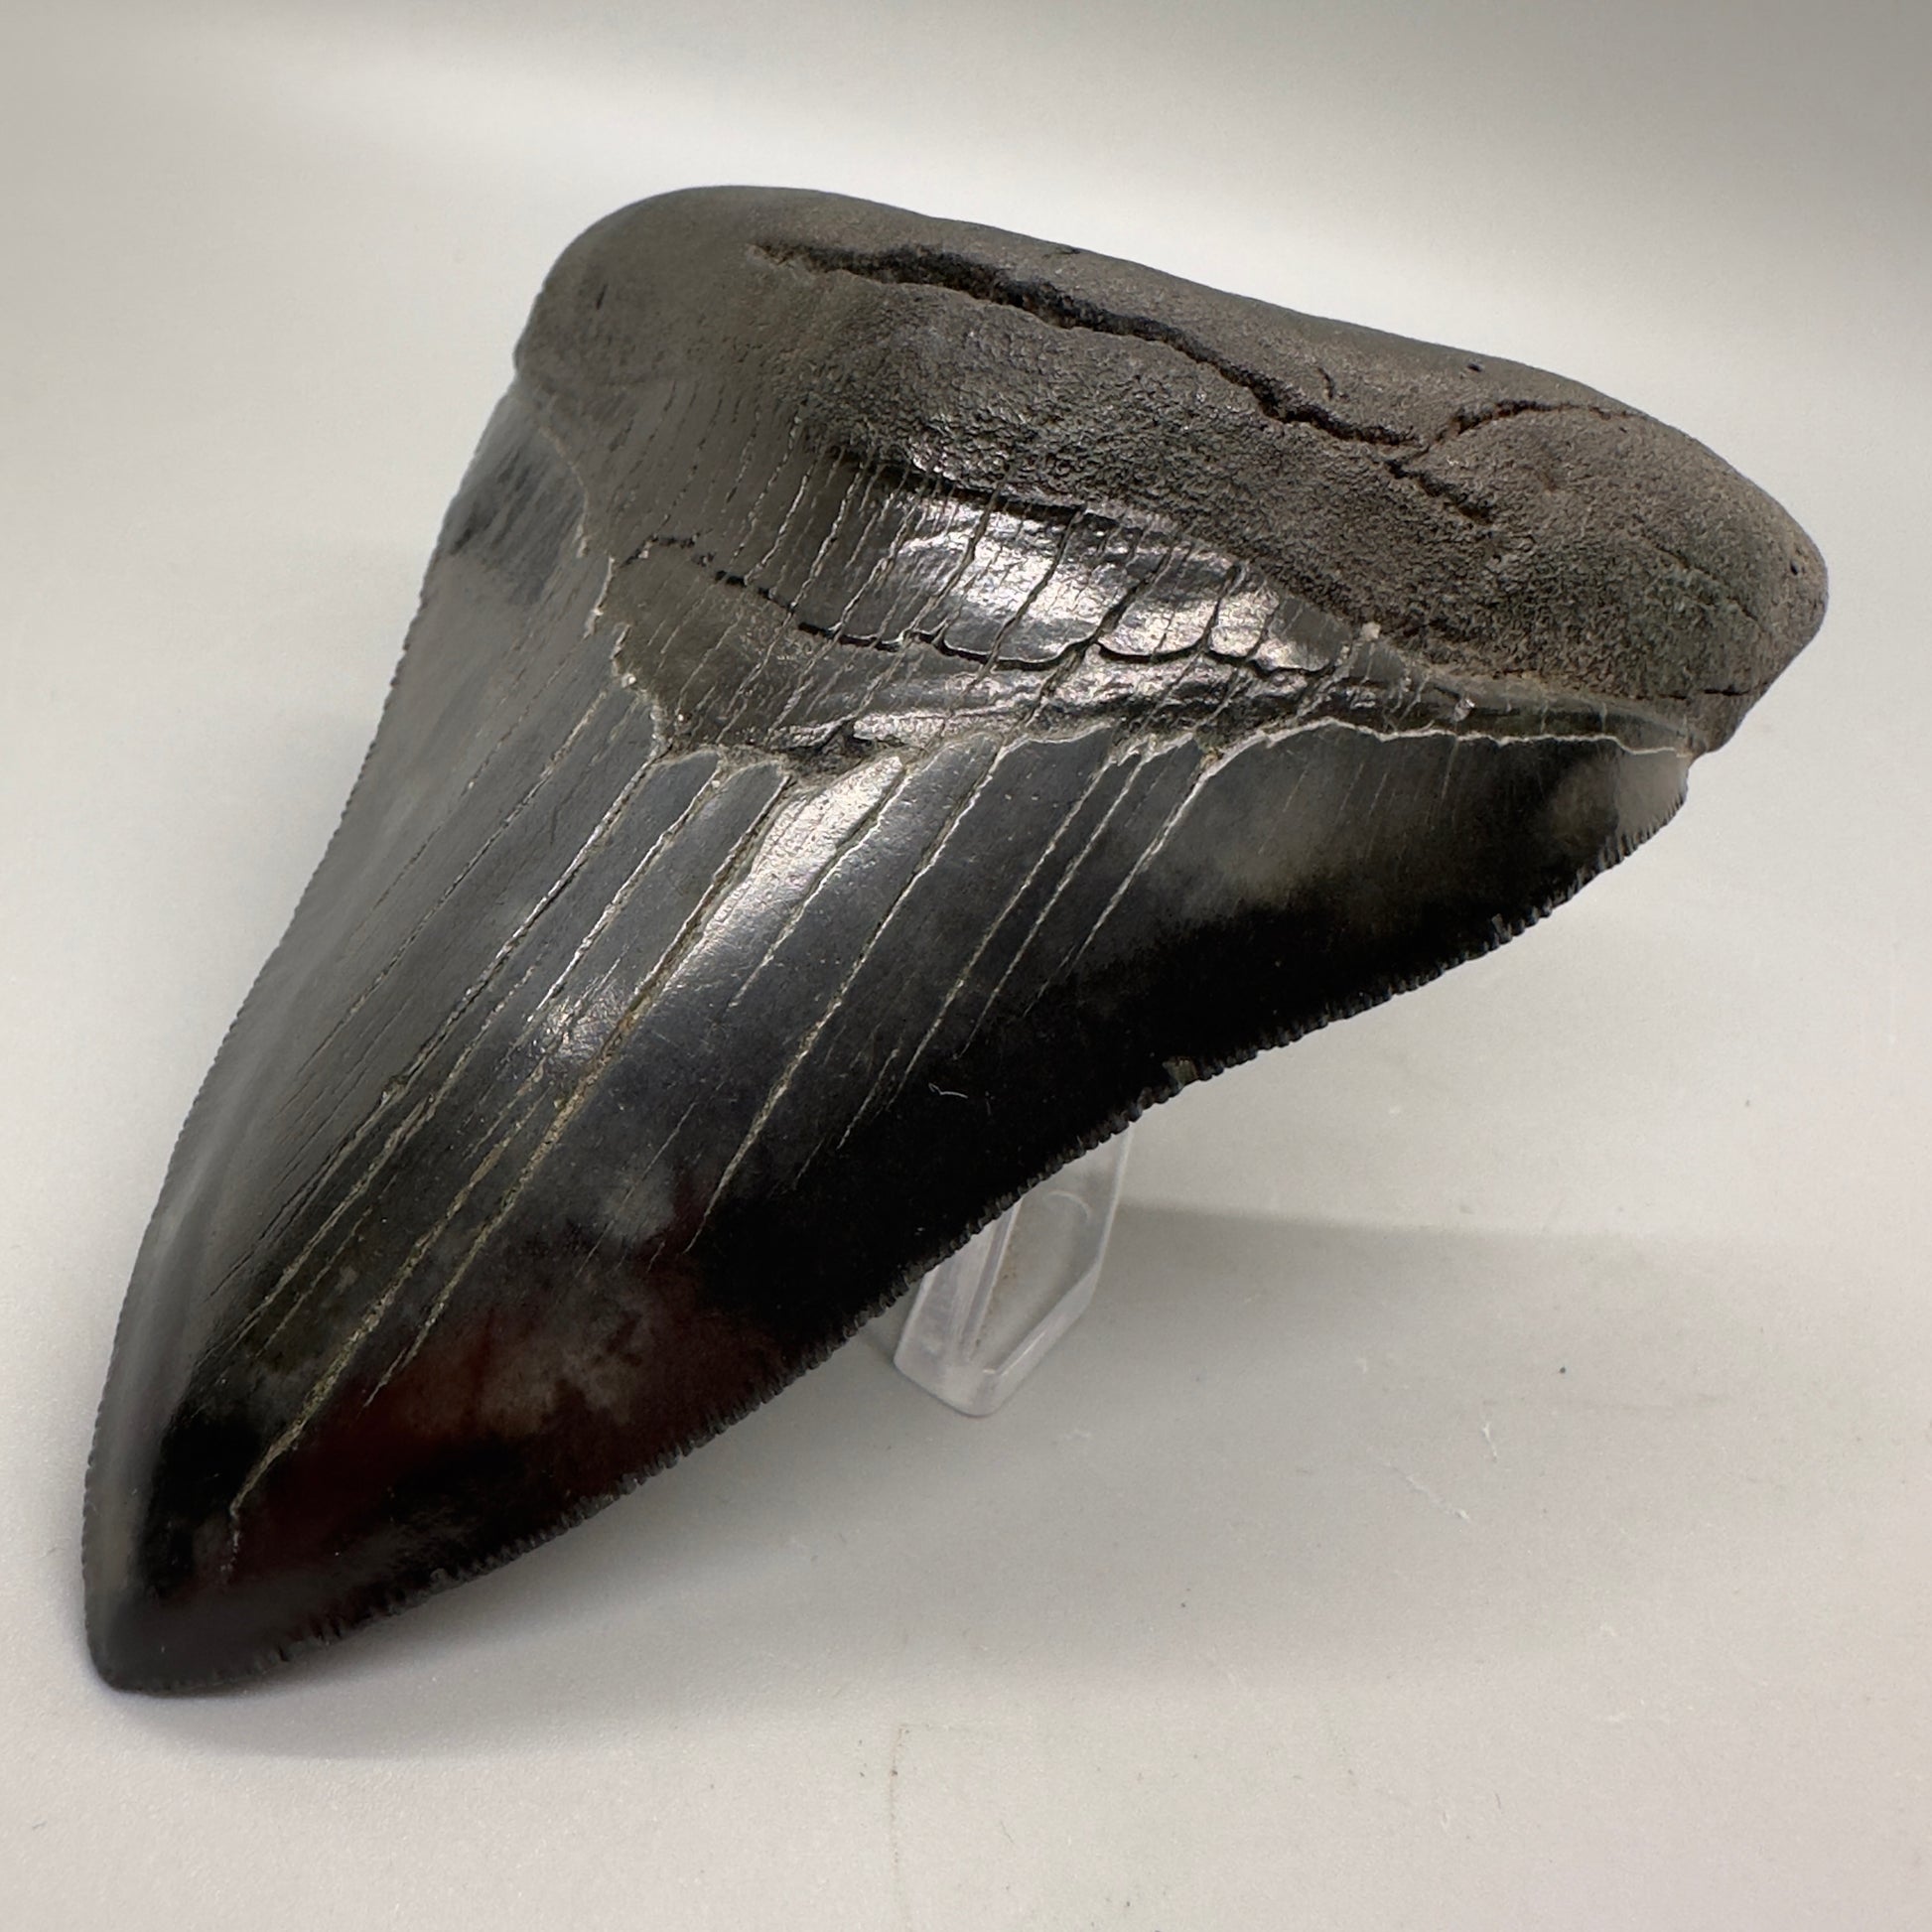 Dark colors 4.47" Fossil Megalodon Tooth: Scuba Diving Discovery from South Carolina CM4618 - Front left